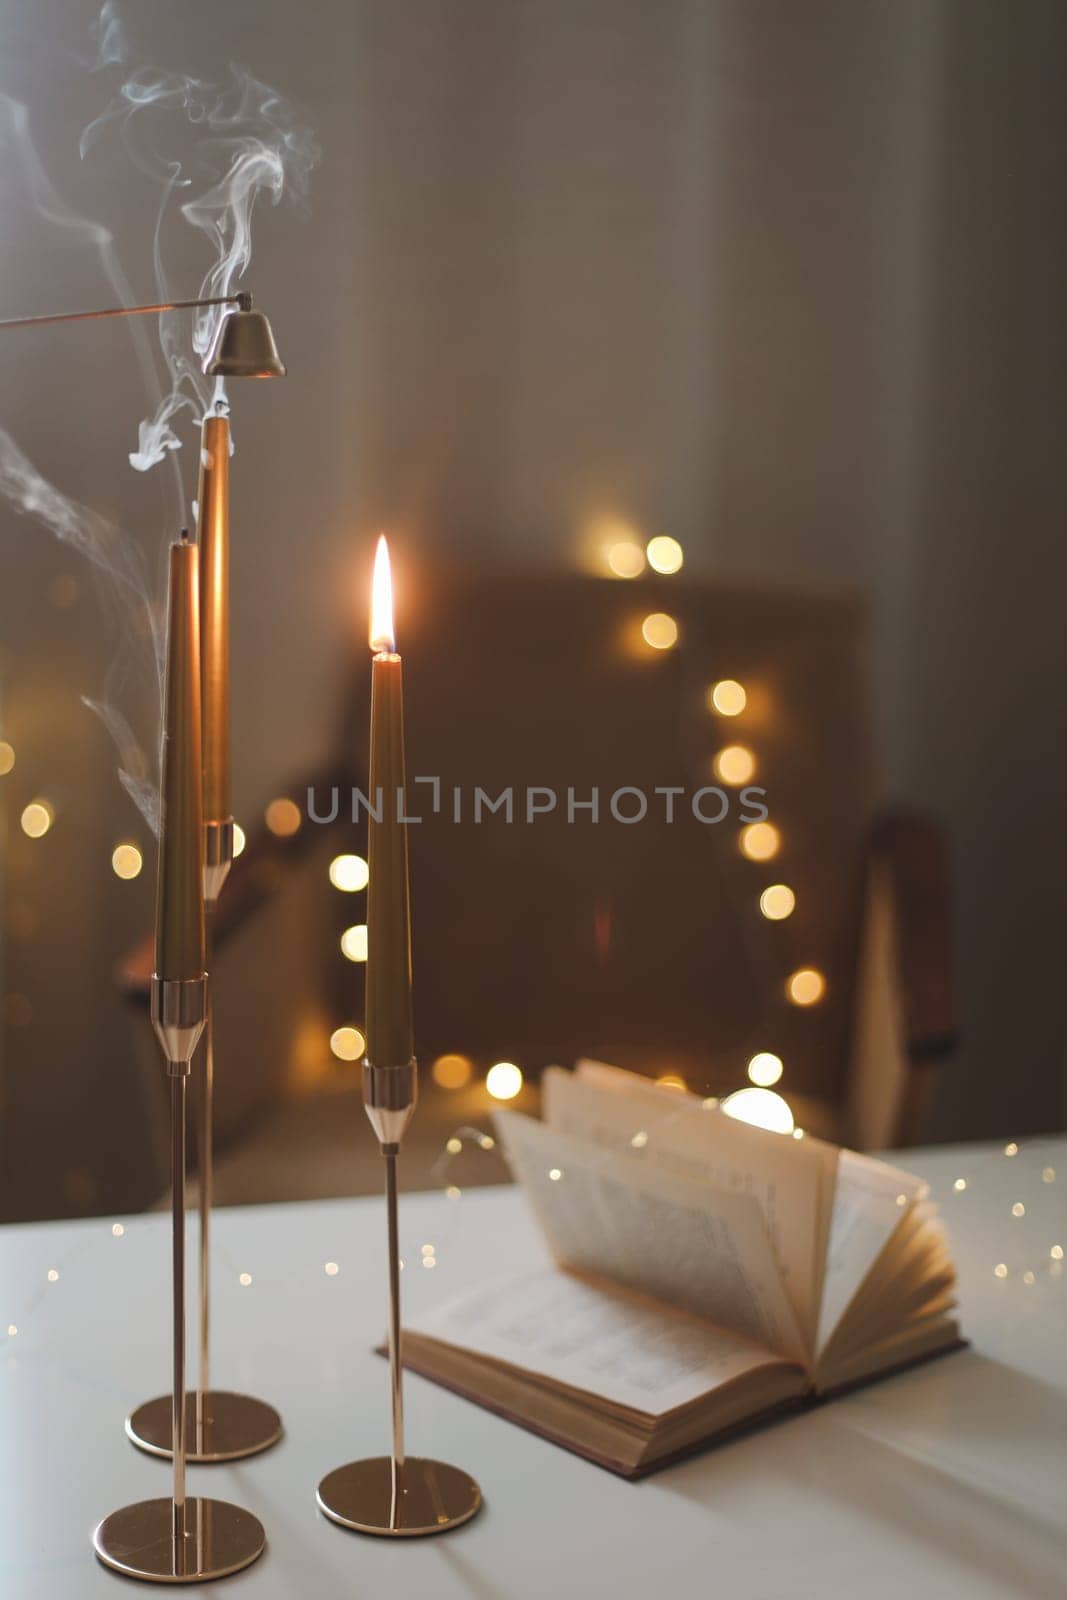 Still life details of home interior, concept of coziness and home atmosphere. beautiful golden candlesticks, scented candle, open book, garland lights. Home autumn concept